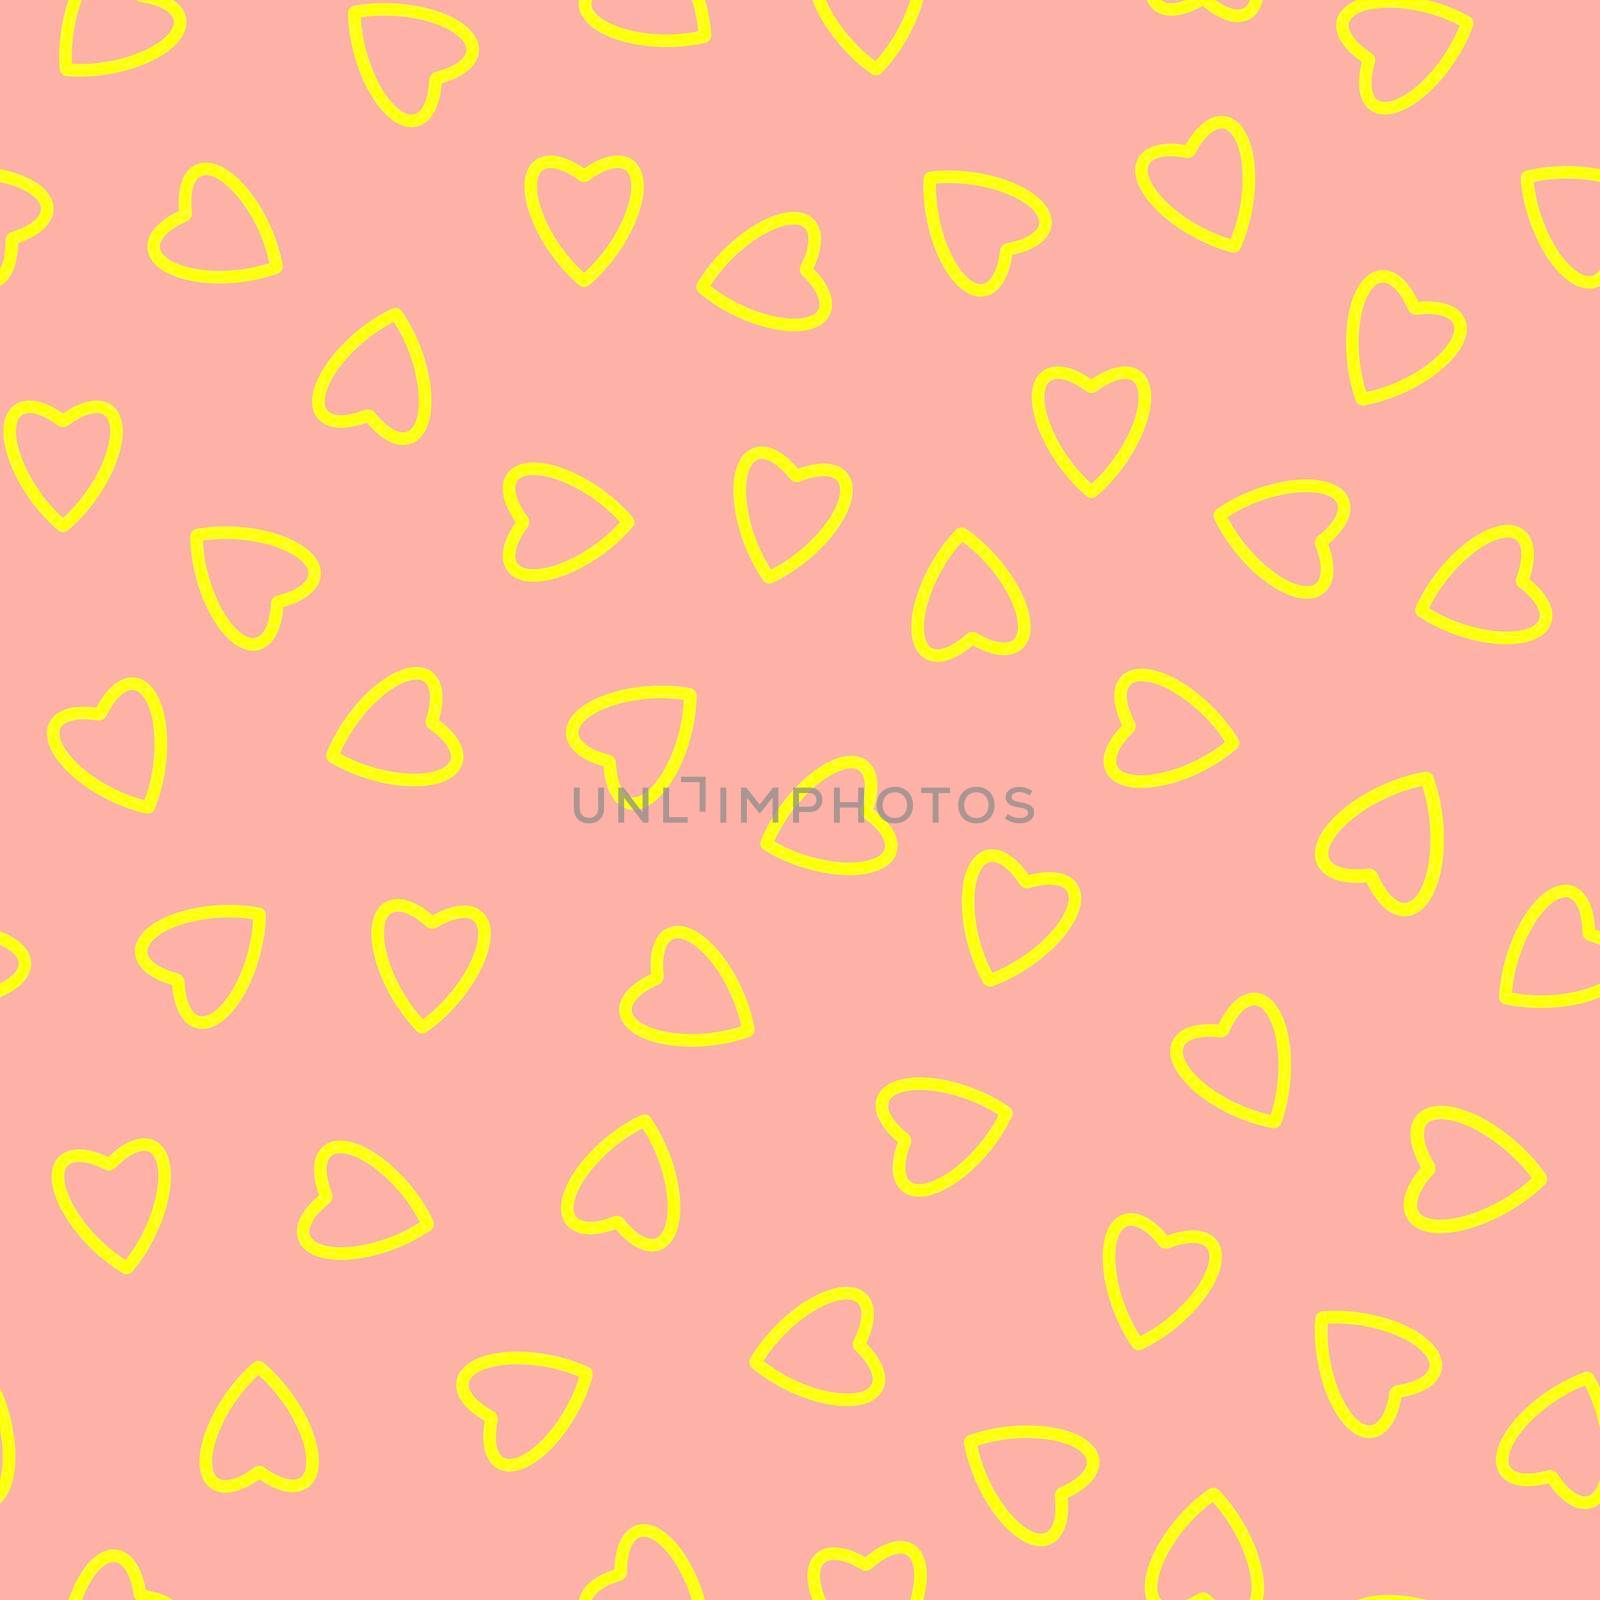 Simple hearts seamless pattern,endless chaotic texture made of tiny heart silhouettes.Valentines,mothers day background.Great for Easter,wedding,scrapbook,gift wrapping paper,textiles.Yellow on peach.